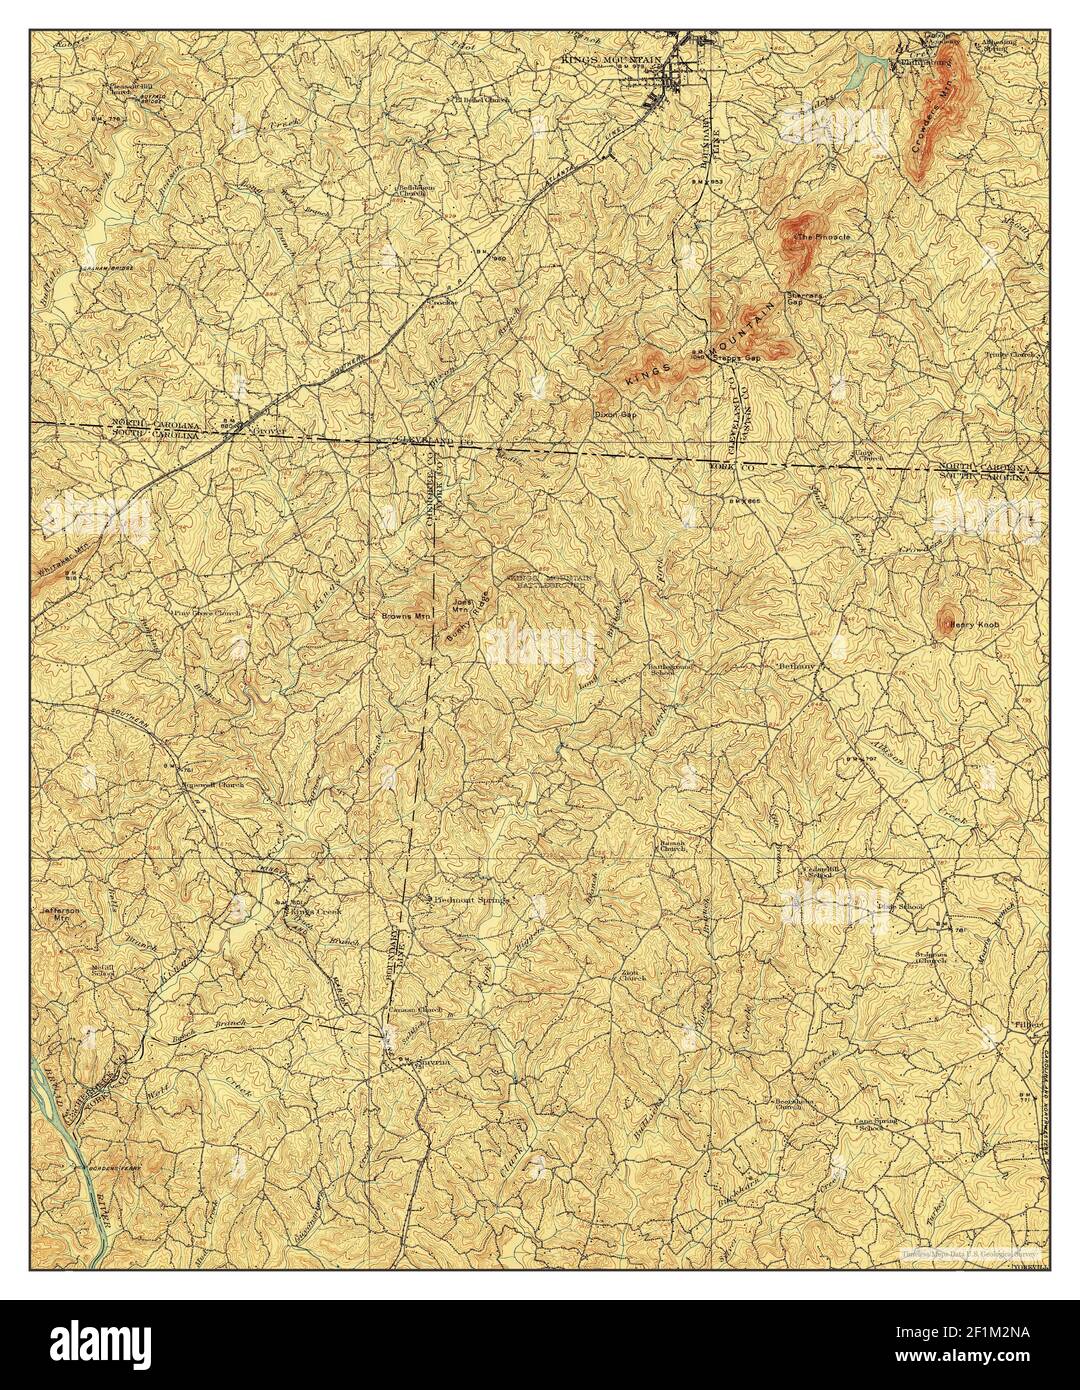 Kings Mountain, North Carolina, map 1908, 1:62500, United States of America by Timeless Maps, data U.S. Geological Survey Stock Photo